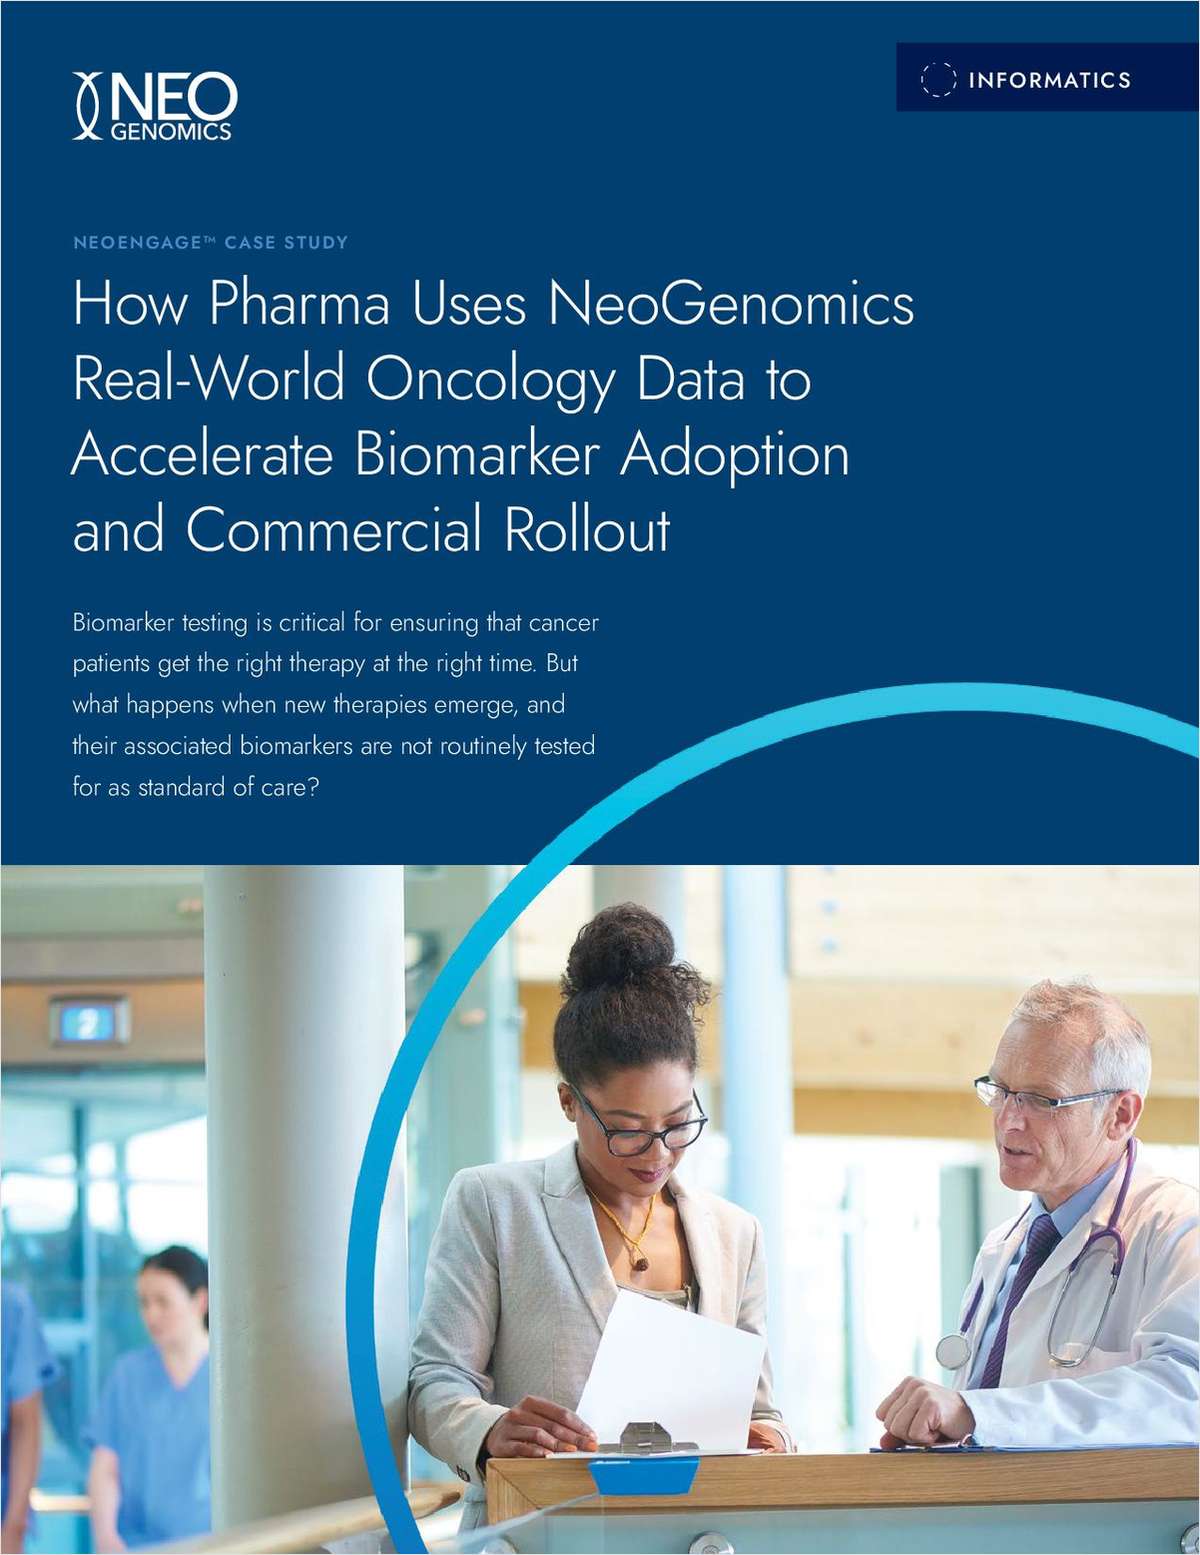 How Pharma Uses NeoGenomics Real-World Oncology Data to Accelerate Biomarker Adoption and Commercial Rollout